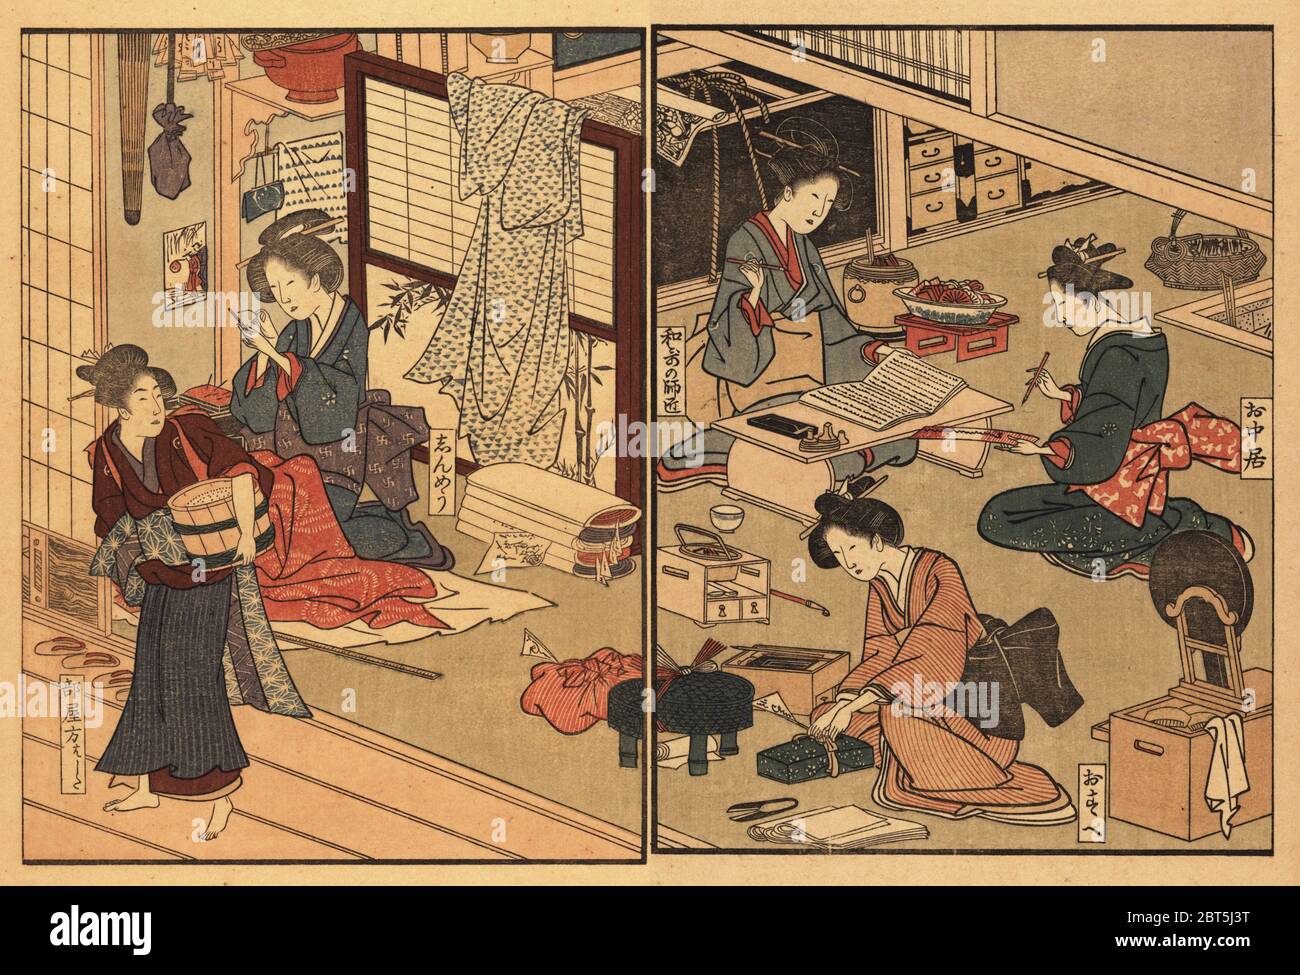 Women of the merchant or artisan class. Waka poetry tutor in a daimyos house. Servants sewing, writing poems, wrapping items and carrying rice. The tatami floor of the room is covered with folded kimono, tobacco pipes, boxes, mirror and hairdressing items, etc. Handcoloured ukiyo-e woodblock print by Toyokuni Utagawa from Shikitei Sanbas Ehon Imayo Sugata (Picture Book of the Modern Forms and Figures, Tokyo, 1916. Reprint of the original from 1802. Stock Photo